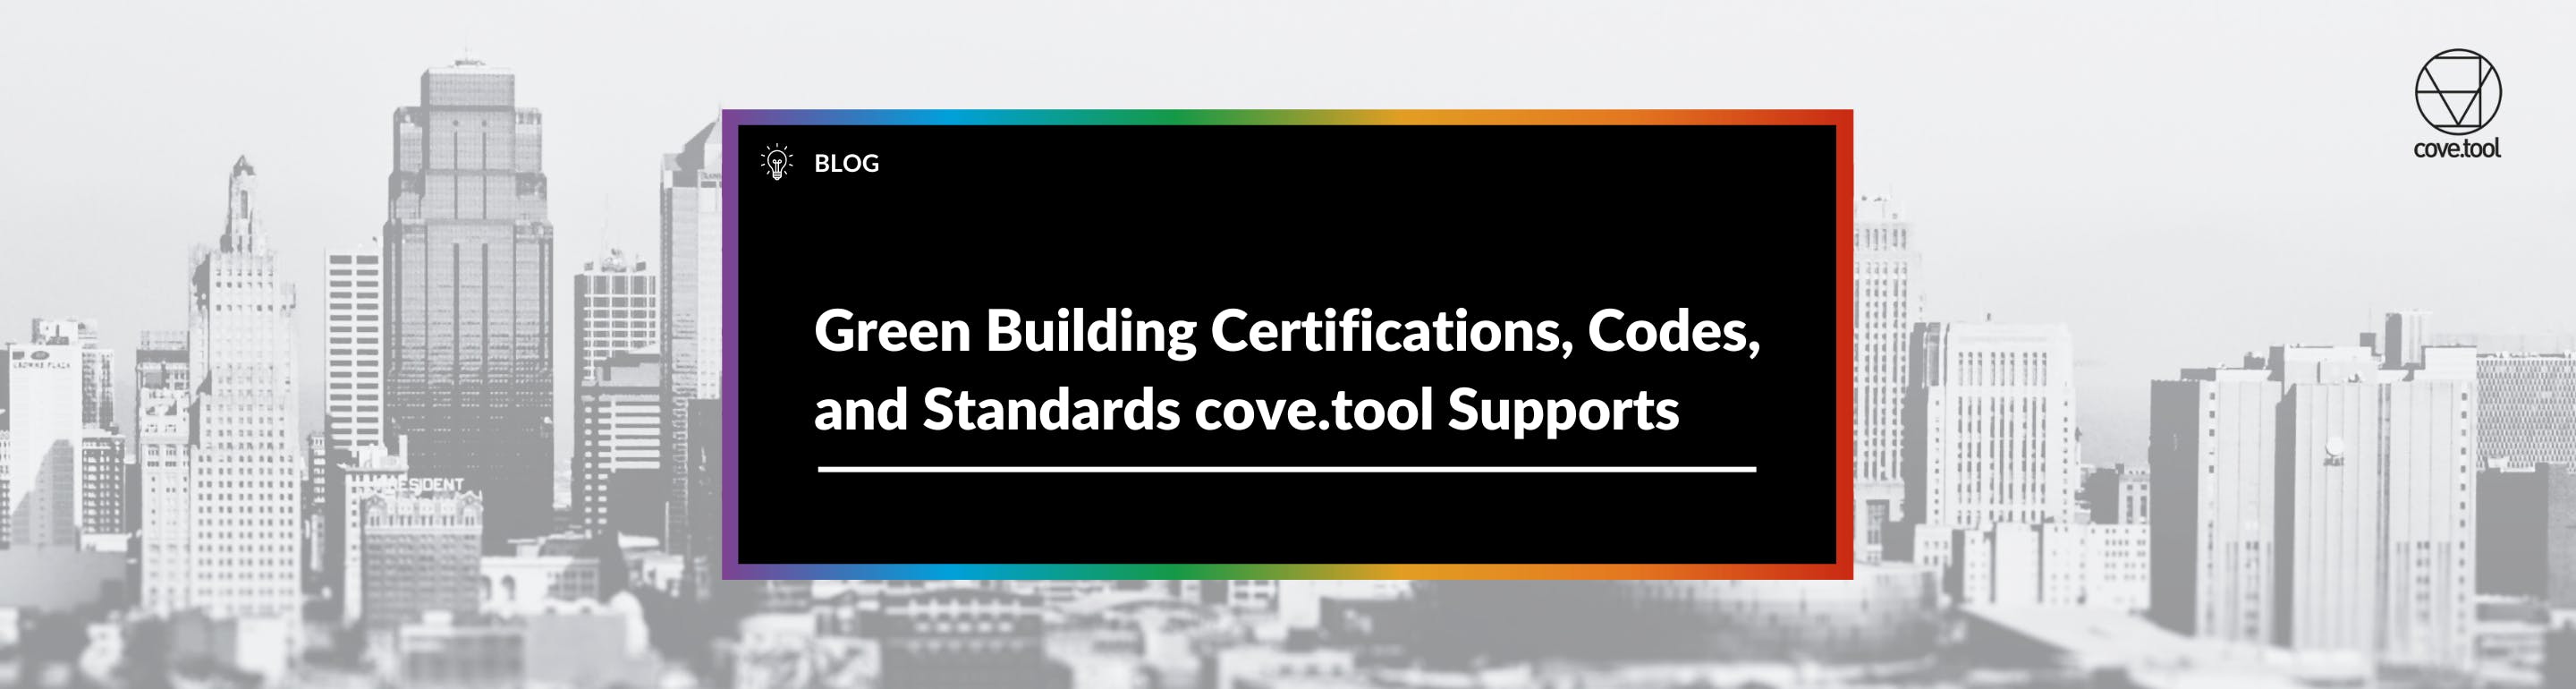 Green Building Certifications, Codes, and Standards cove.tool Supports